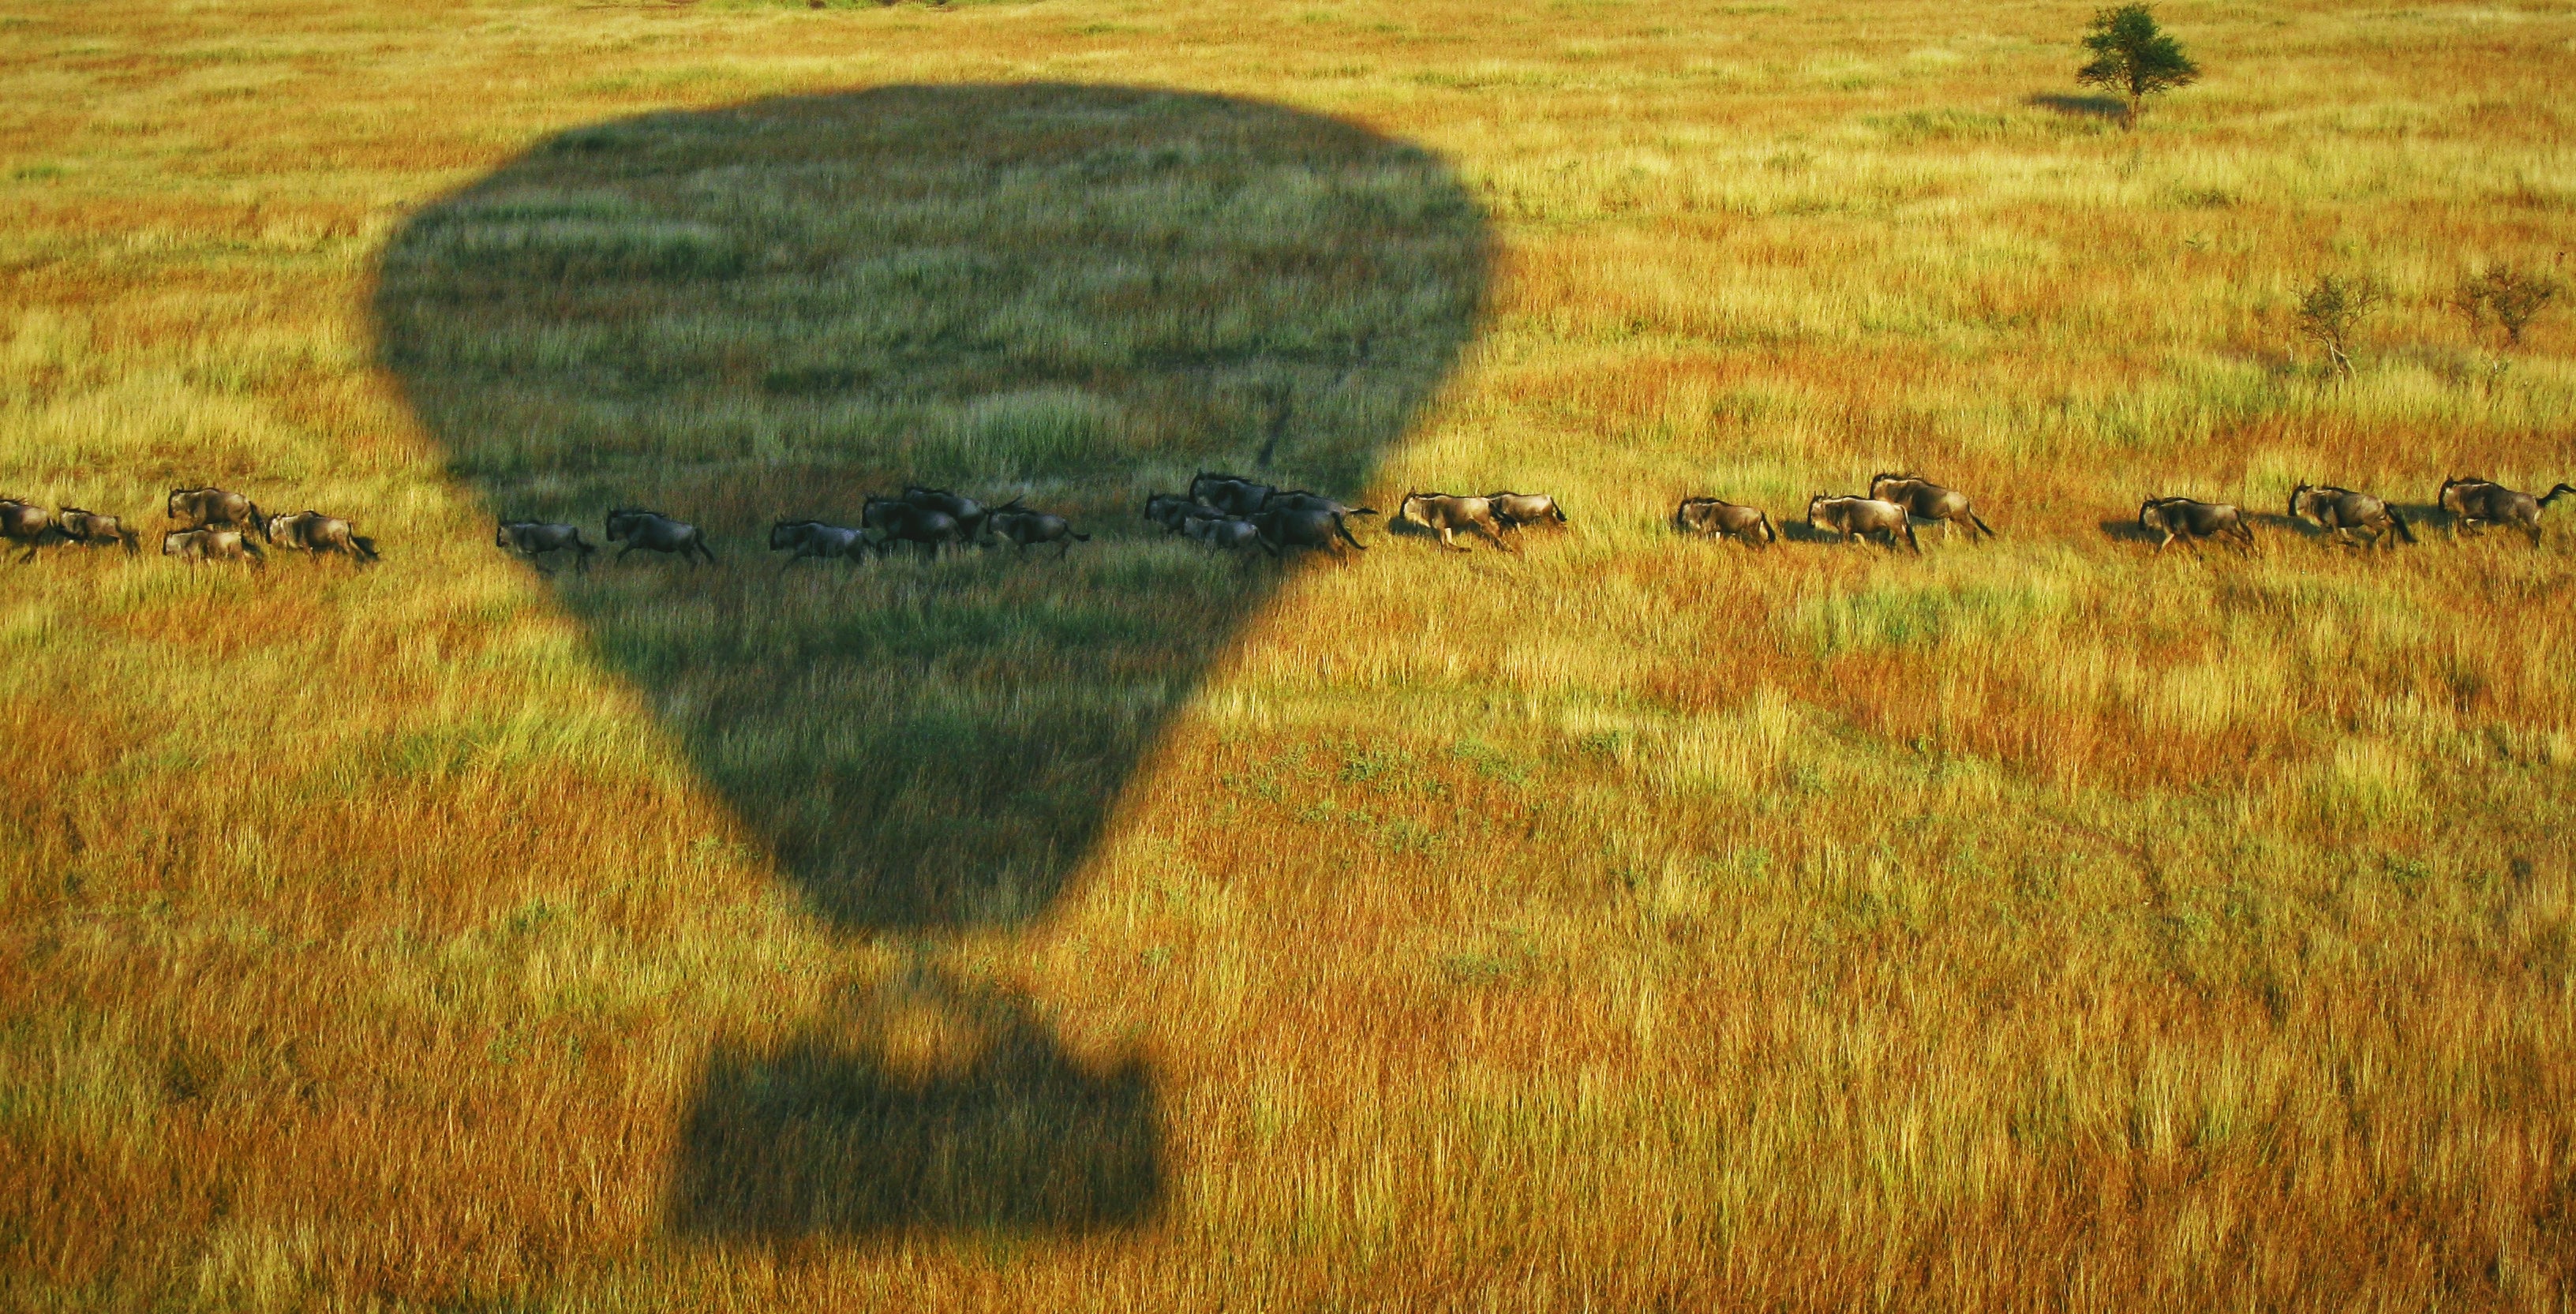 silhouette of hot air balloon with gray animal running on green grass field during daytime